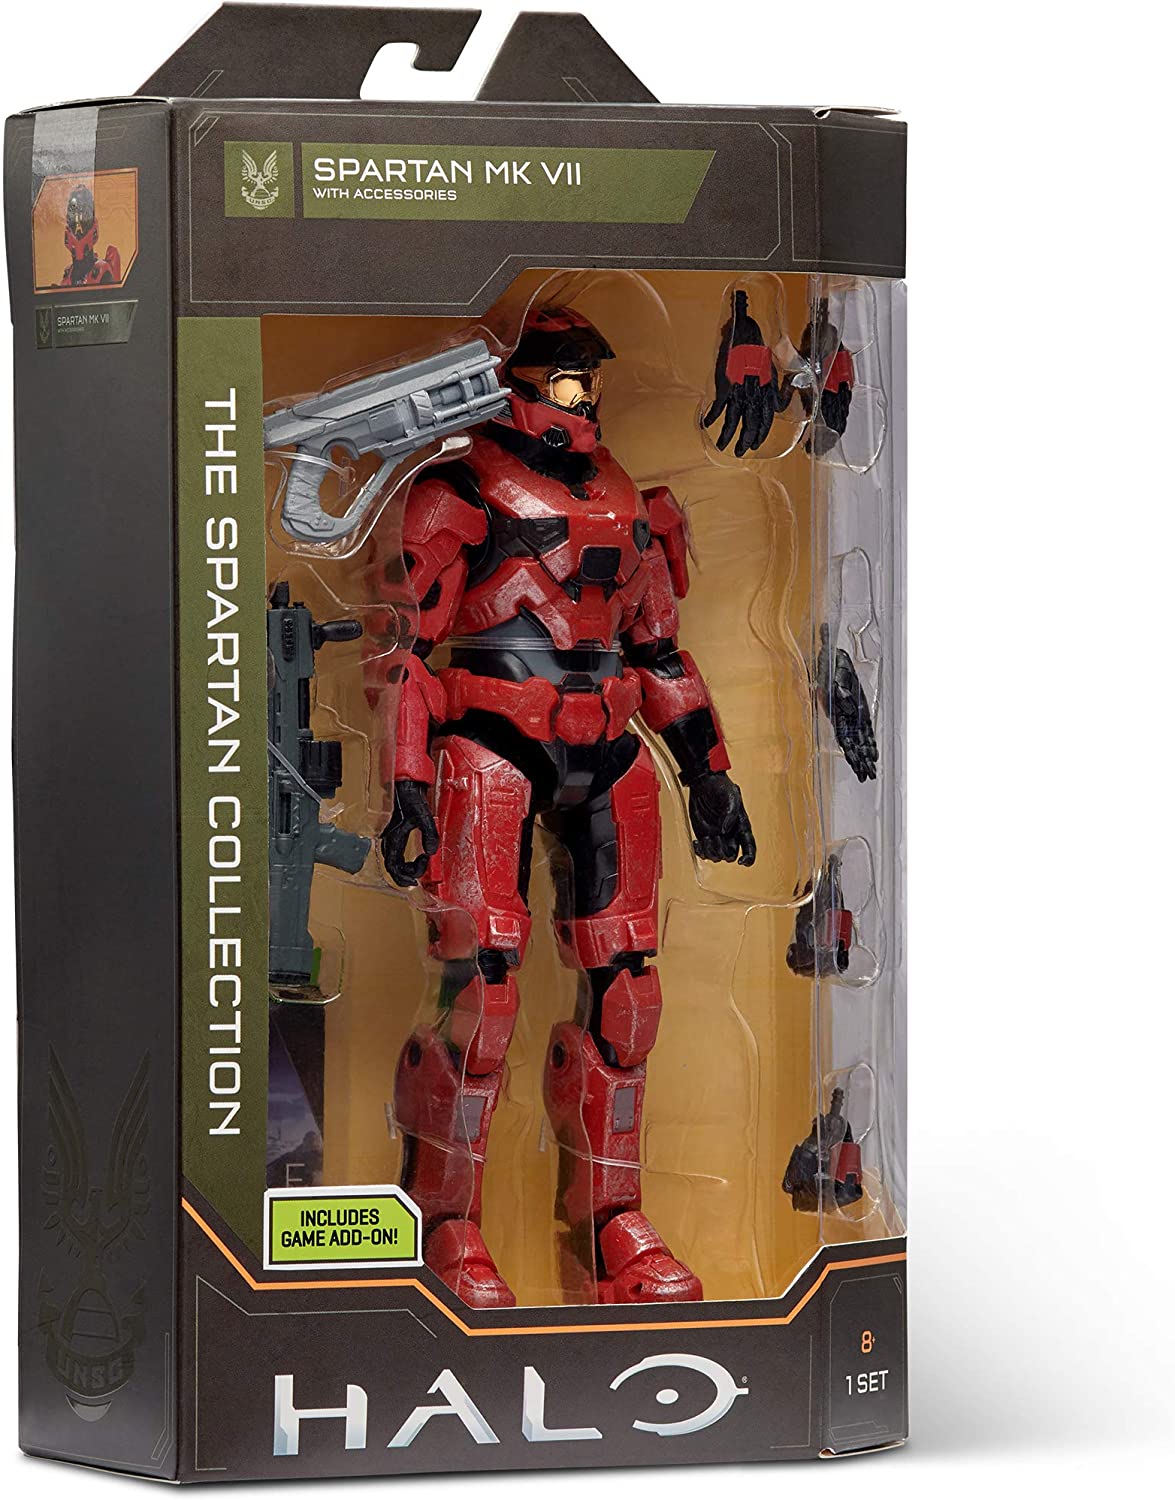 HALO 6.5" The Spartan Collection – Spartan MK VII Highly Articulated, Poseable with Weapon Accessories - Scaled to Play & Display